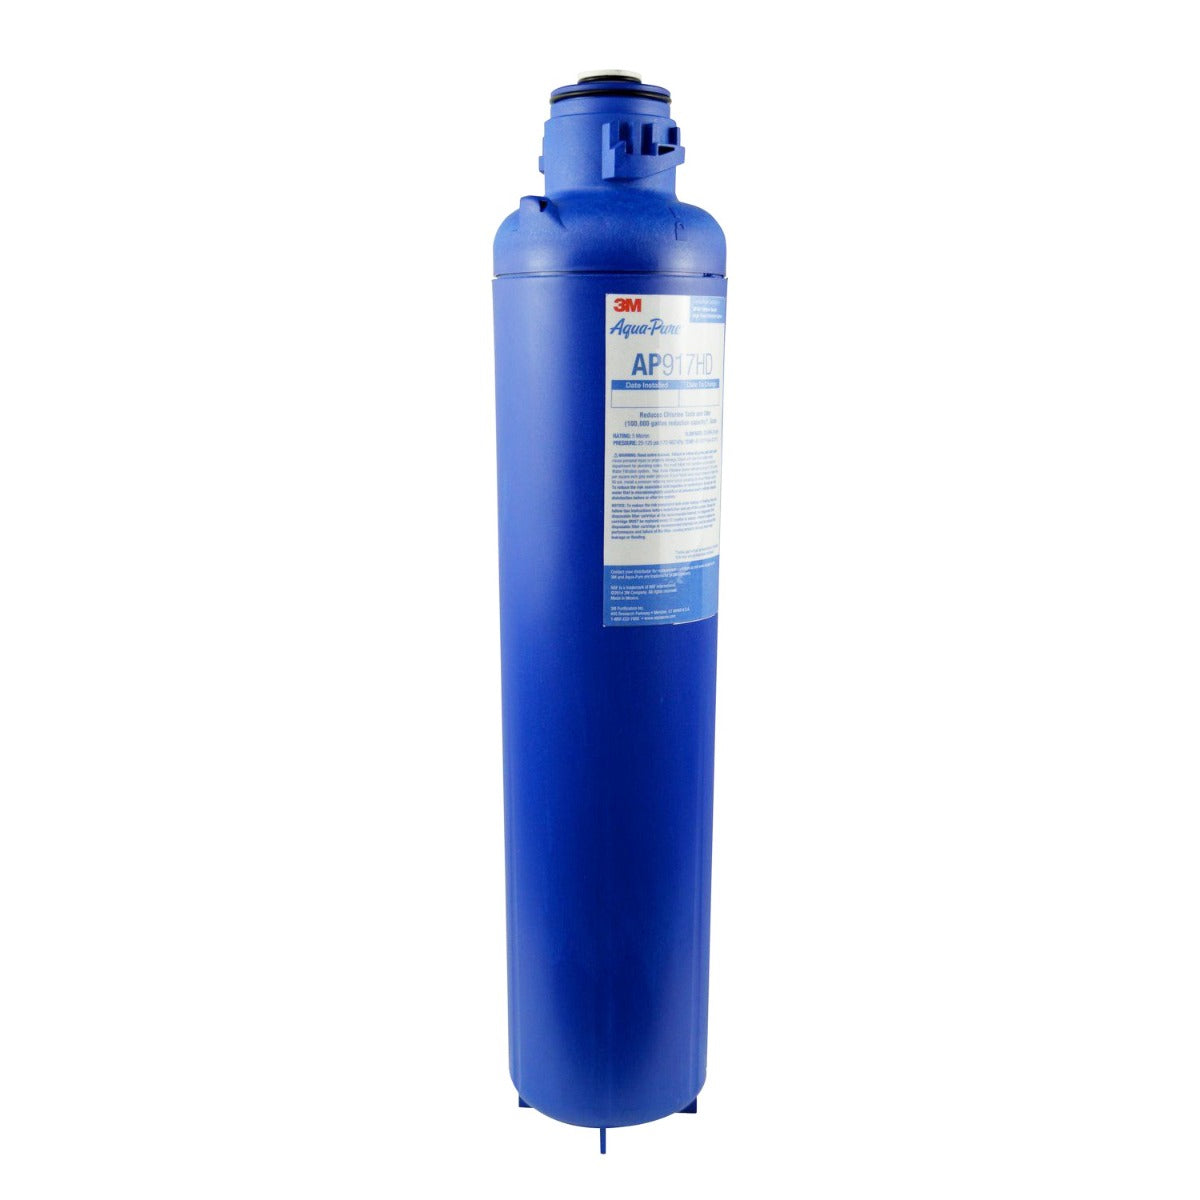 AP917HD Whole House Water Filter Replacement by 3M Aqua-Pure